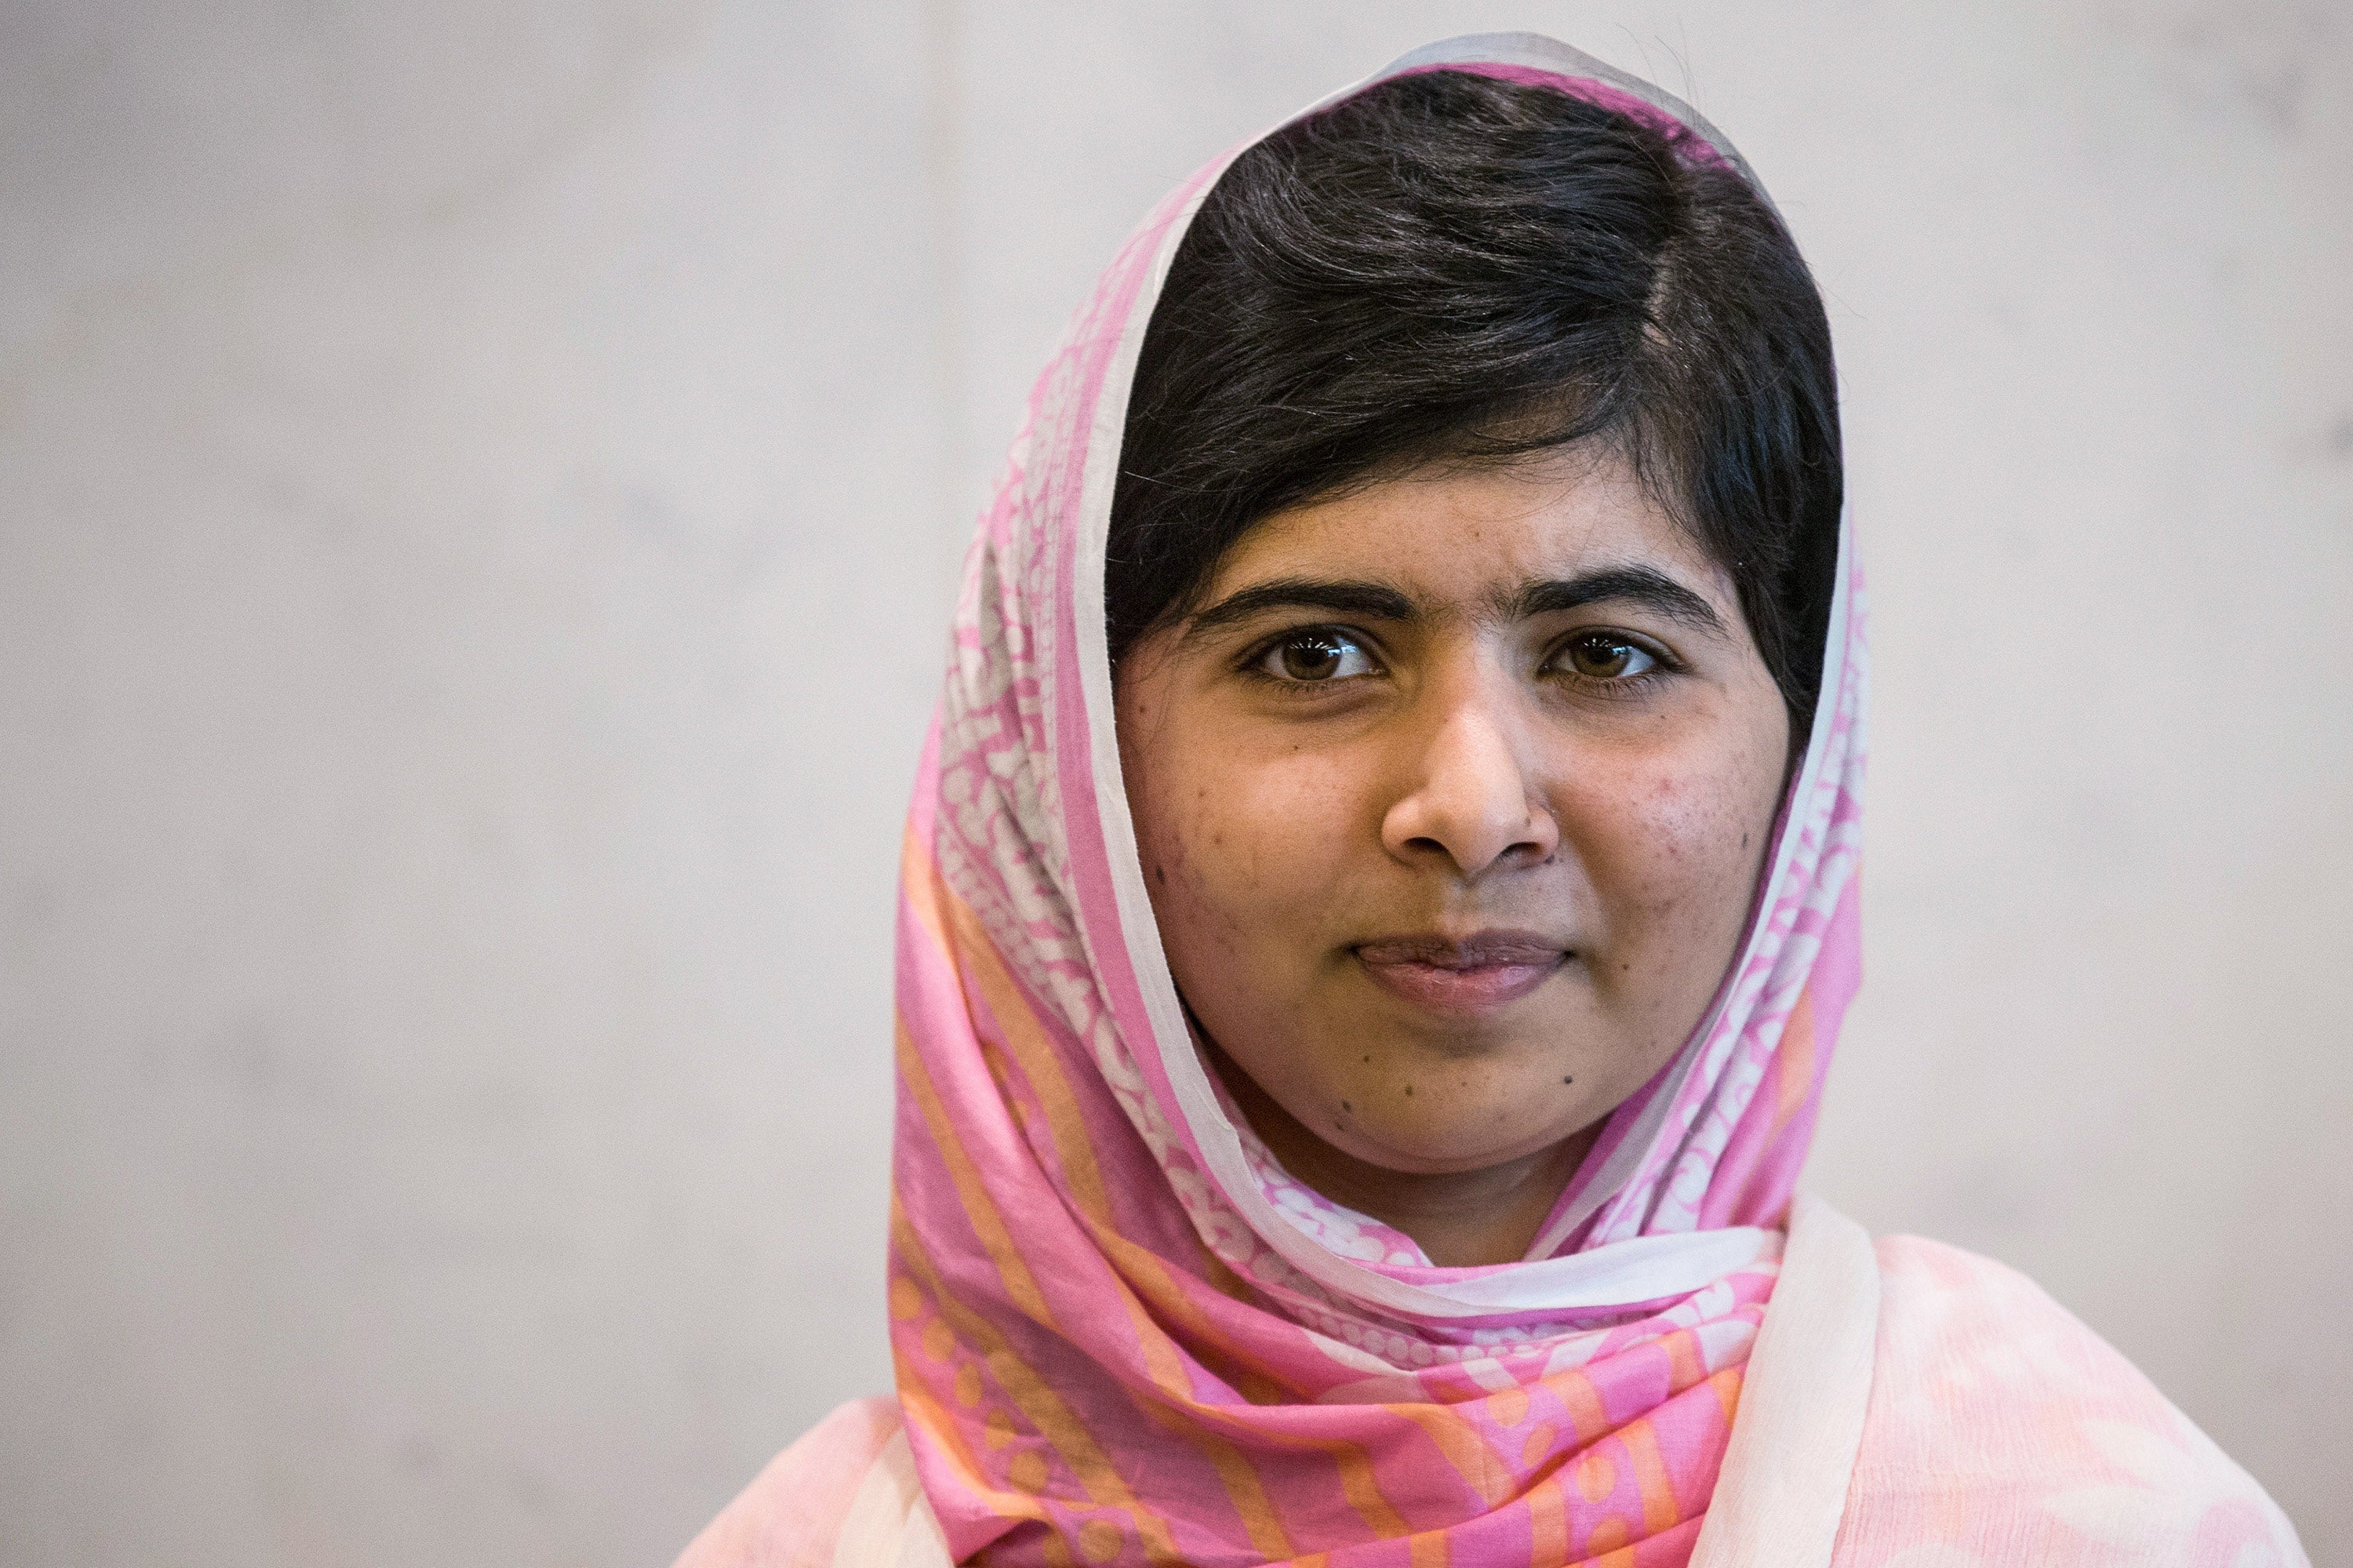 Malala Yousafzai has criticised the objectification of women in pop music